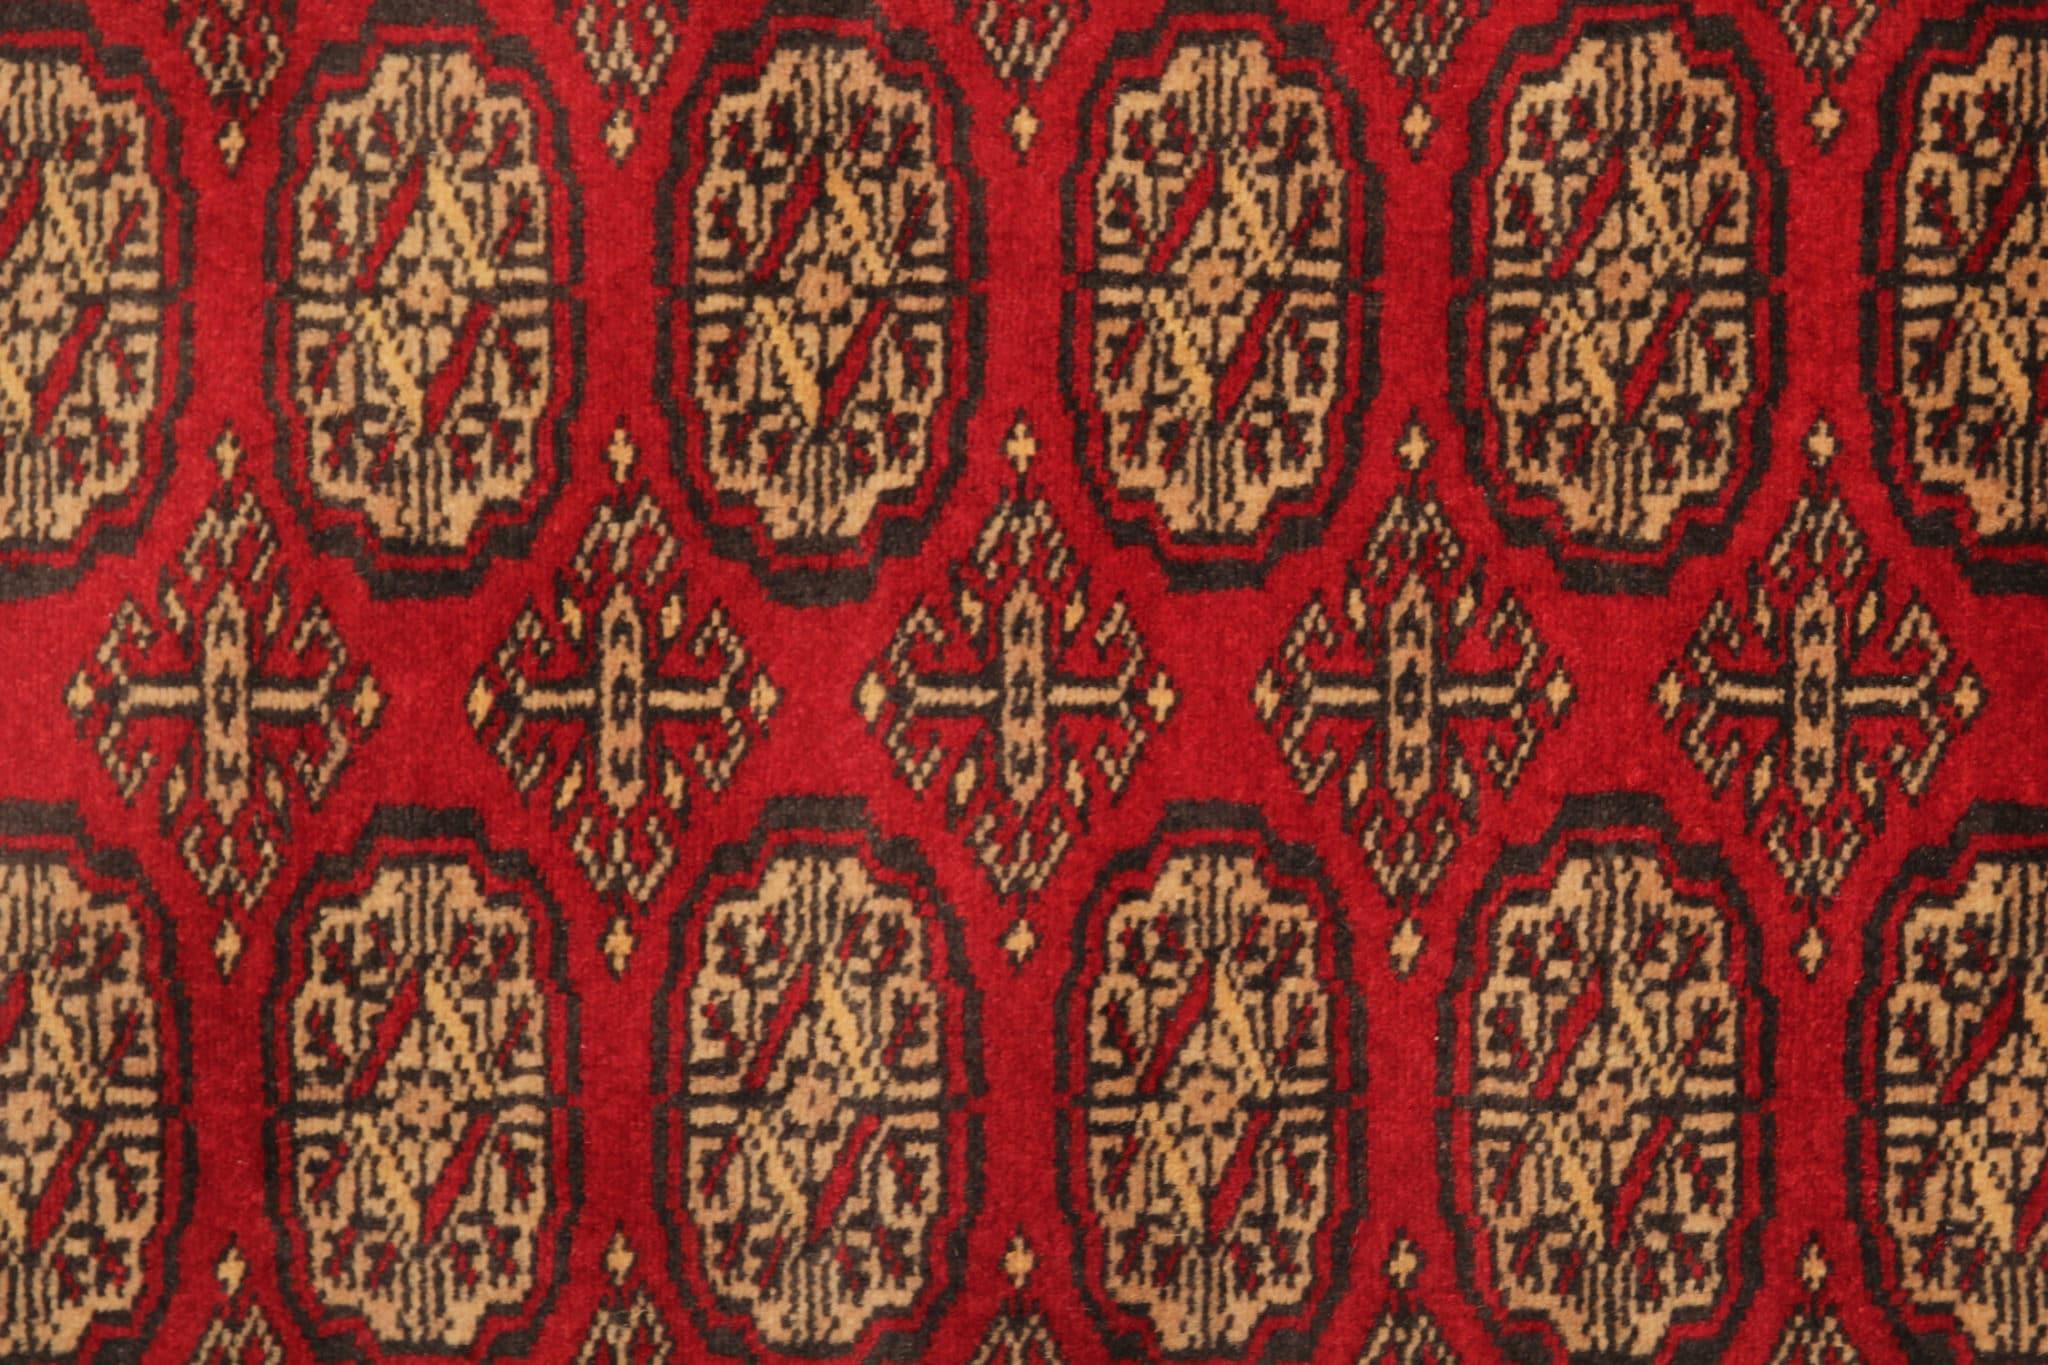 The excuisite red runner rug, featuring beautiful medallion patterns and crafted by hand with care. This vintage Oriental rug comes from Pakistan, Turkmen, and Bokhara regions, boasting a blend of wool and cotton for durability and comfort.
 

 In